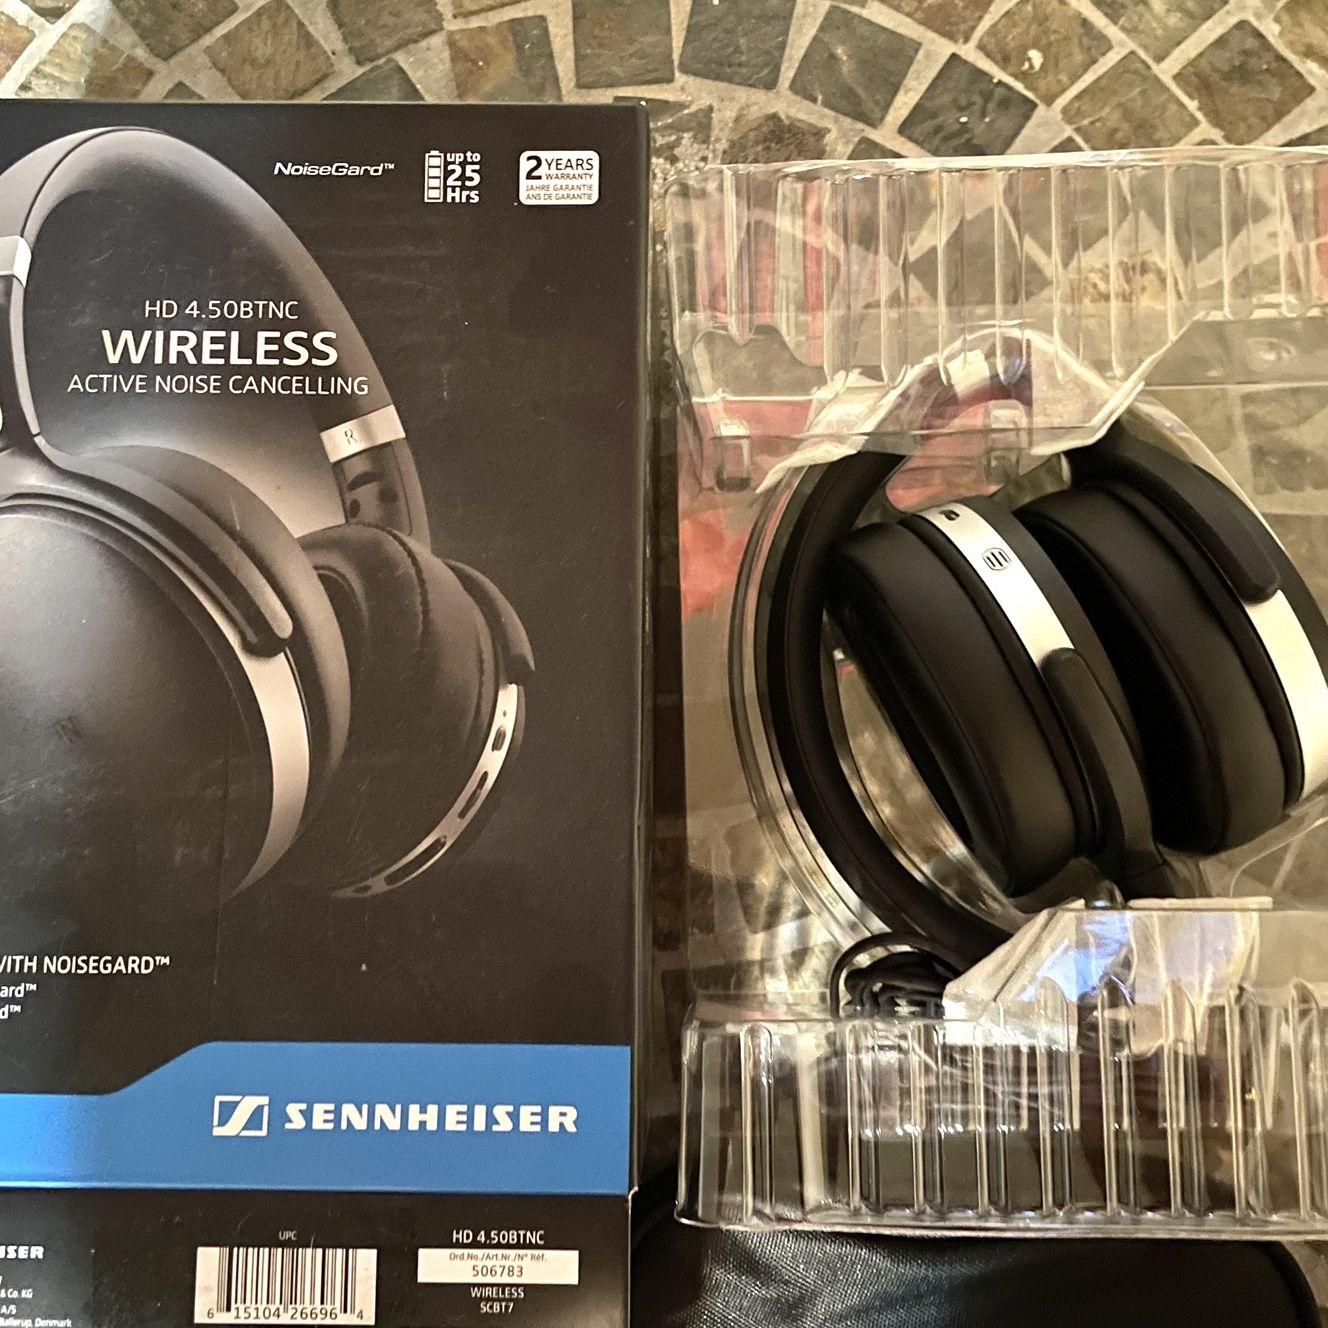 ennheiser Consumer Audio HD 450BT Bluetooth 5.0 Wireless Headphone with Active Noise Cancellation - 30-Hour Battery Life, USB-C Fast Charging, Virtual